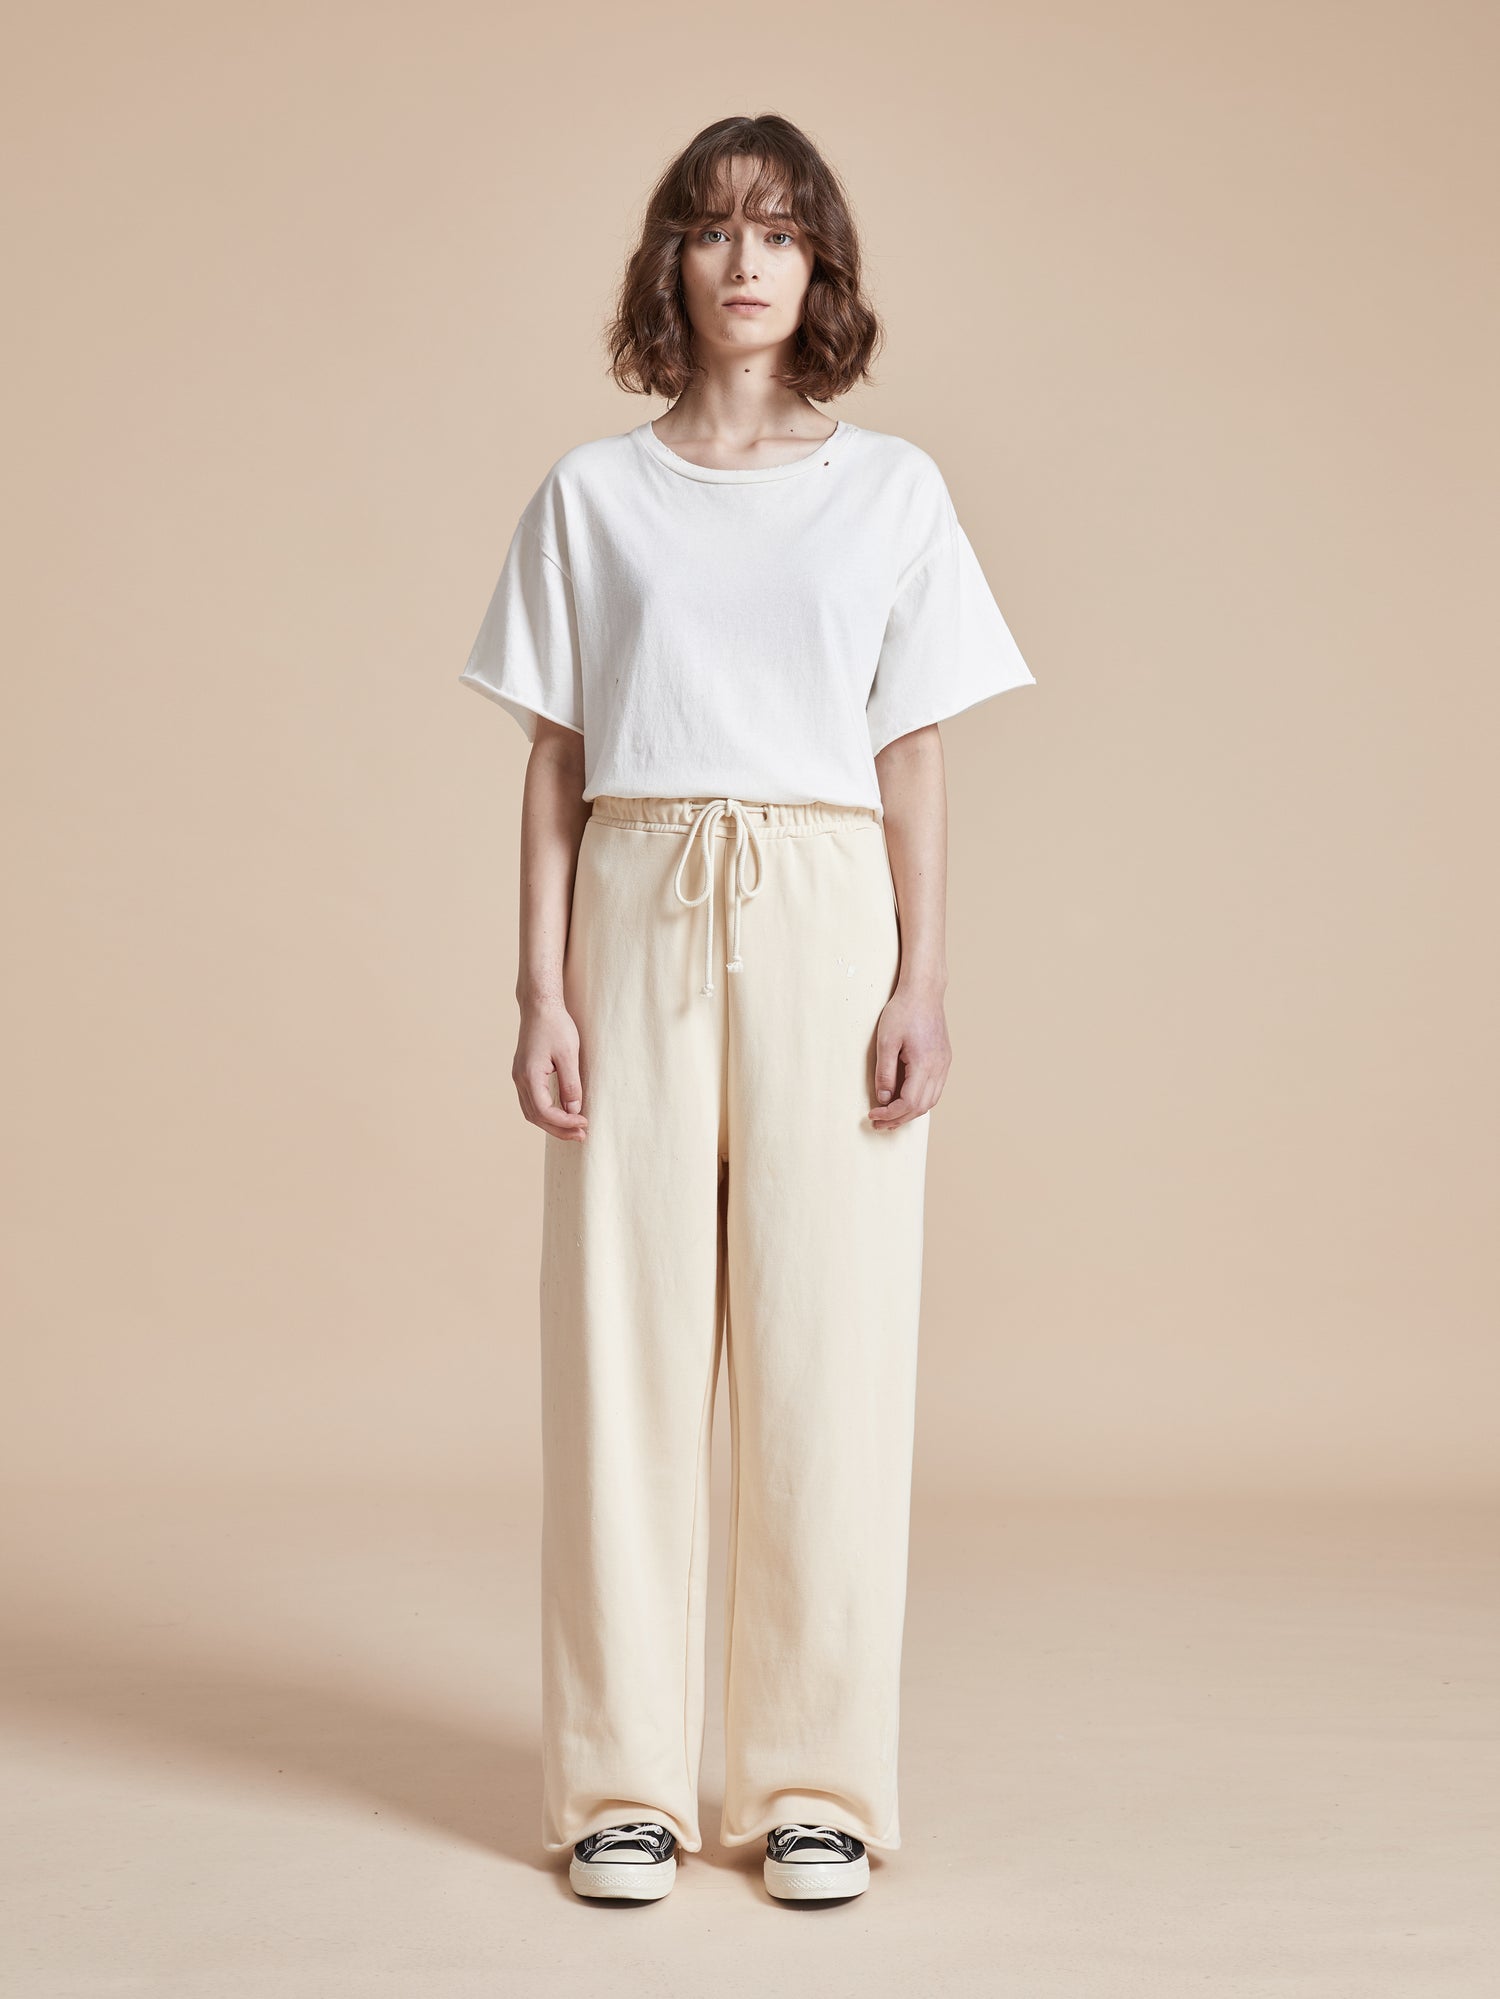 The model is wearing a white t-shirt and Found's Sandshell Lounge Pants with a worn-in look.